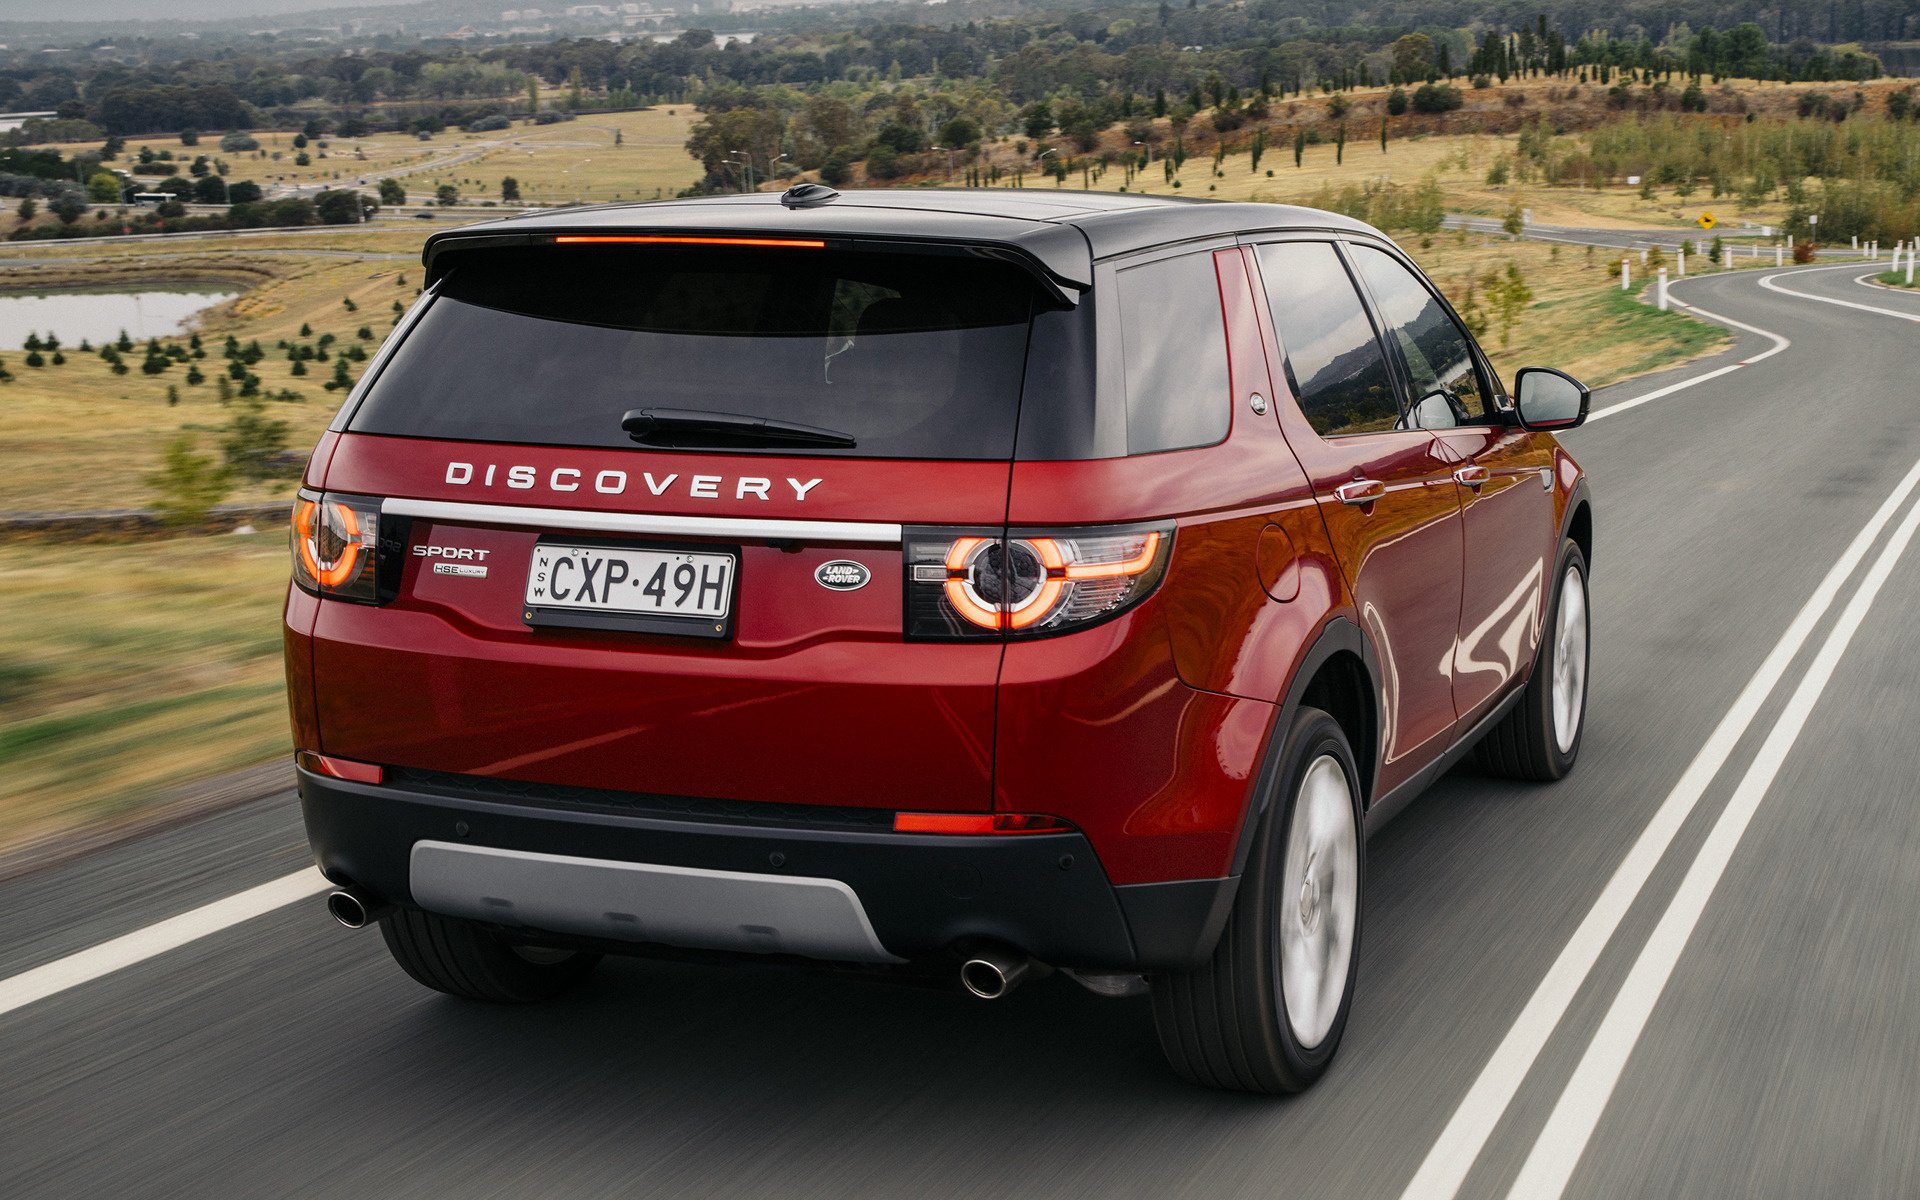 Land rover sport 2015. Ленд Ровер Дискавери спорт 2015. Land Rover Discovery Sport 2015. Ленд Ровер Дискавери 2015. Range Rover Discovery Sport 2015.